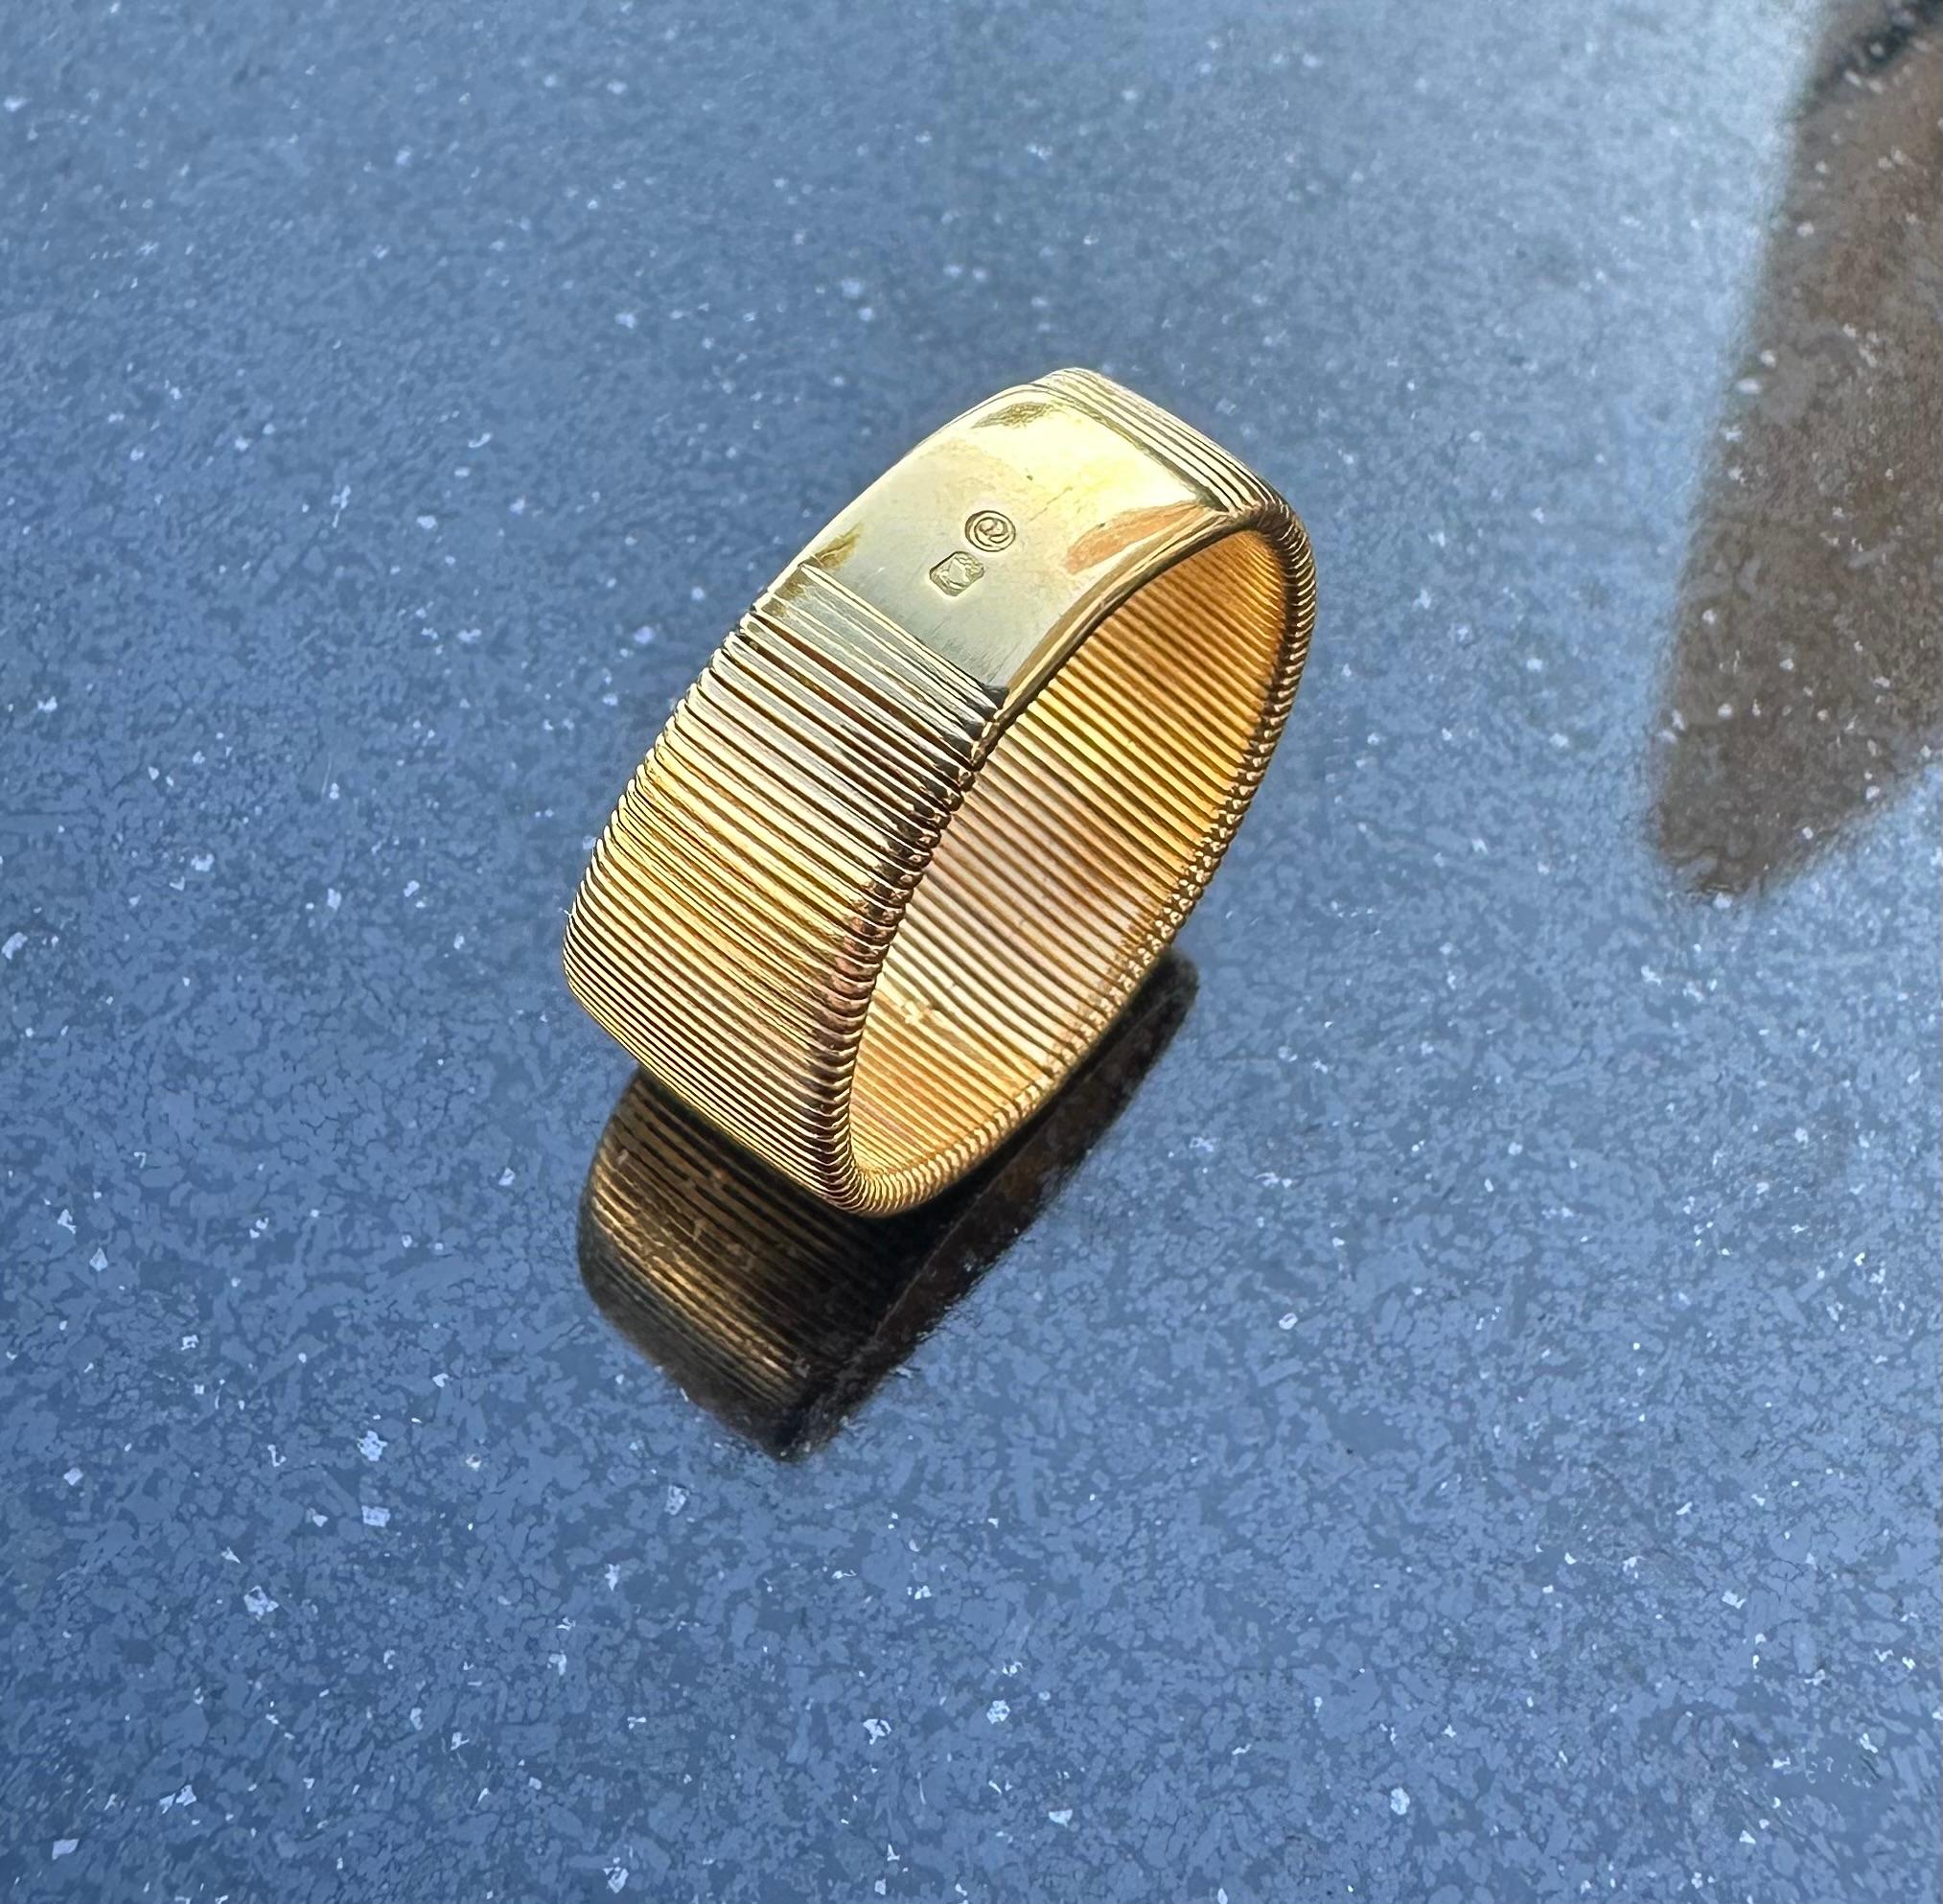 Yellow Gold Band Ring made by Rosior.
Weight in 19.2K Gold: 9.5 g.
Handmade in Portugal.
Stamped by the portuguese assay office as 19.2K Gold.
Stamped with Rosior hallmark.
Loyal to artisanal techniques, Rosior master craftsmen carefully curate each